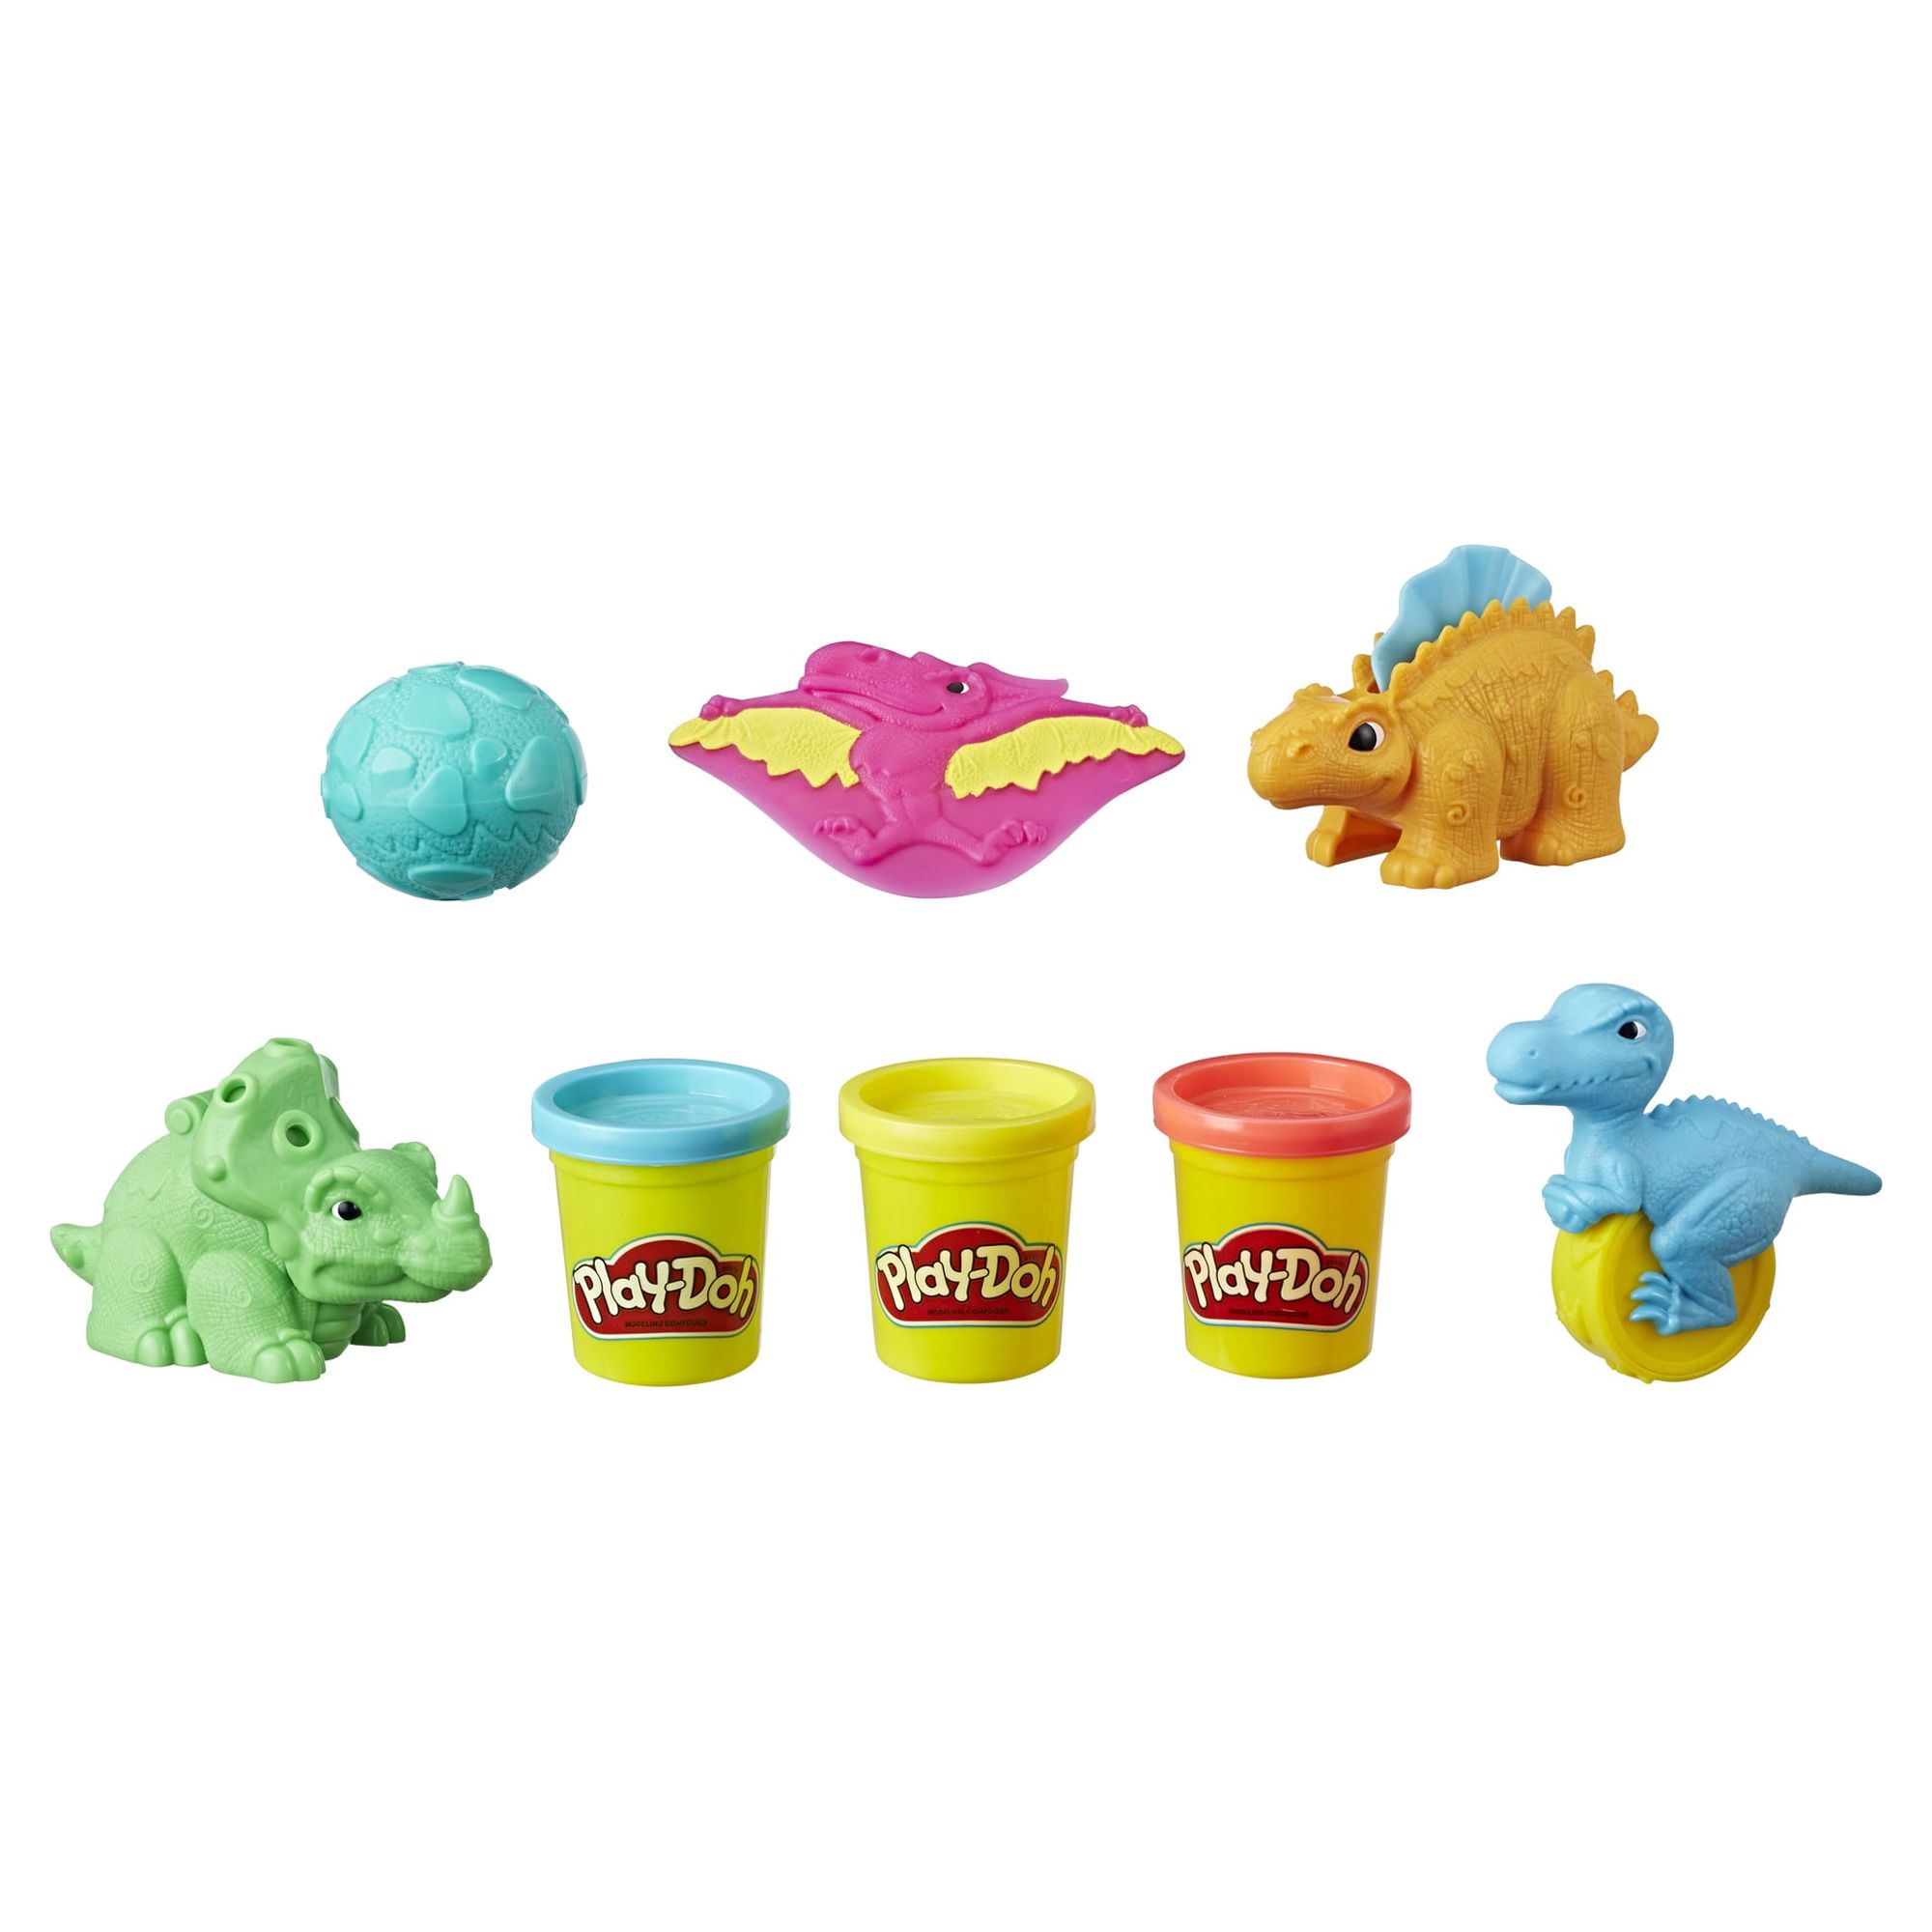 Play-Doh Dino Tools Dinosaur Toys with 3 Cans Modeling Compound Colors - image 3 of 15